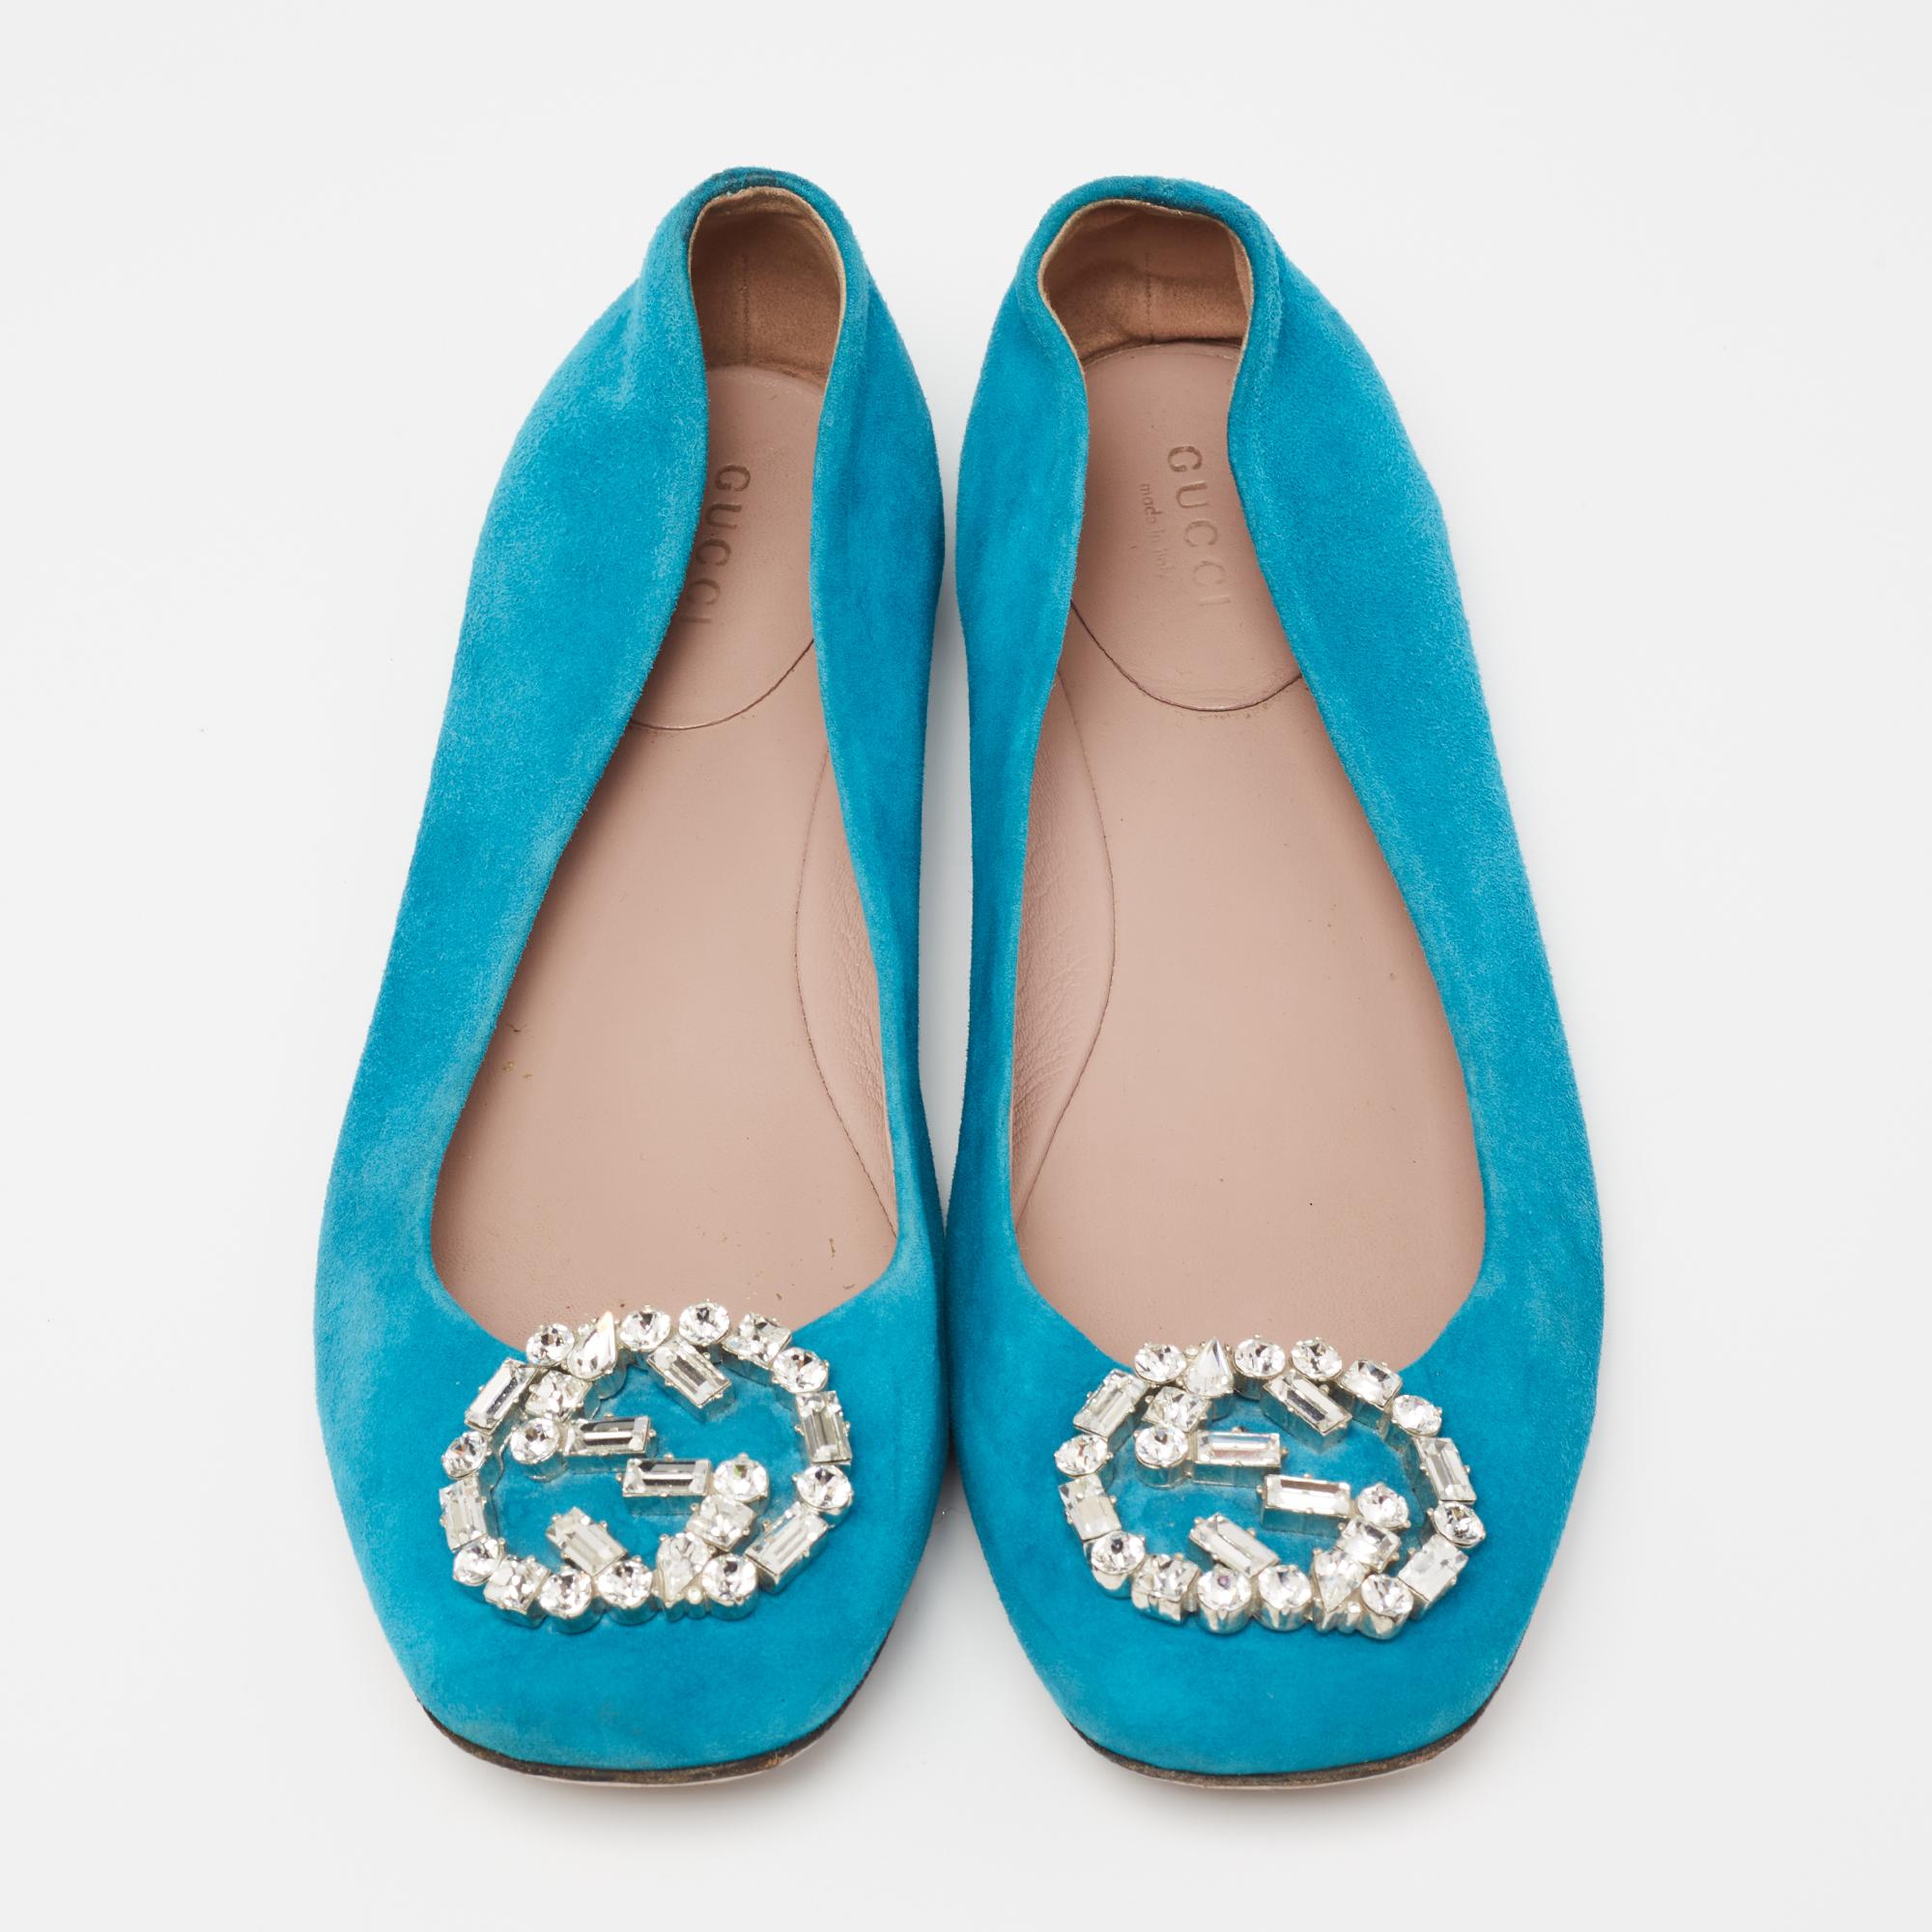 ballet flats with crystals